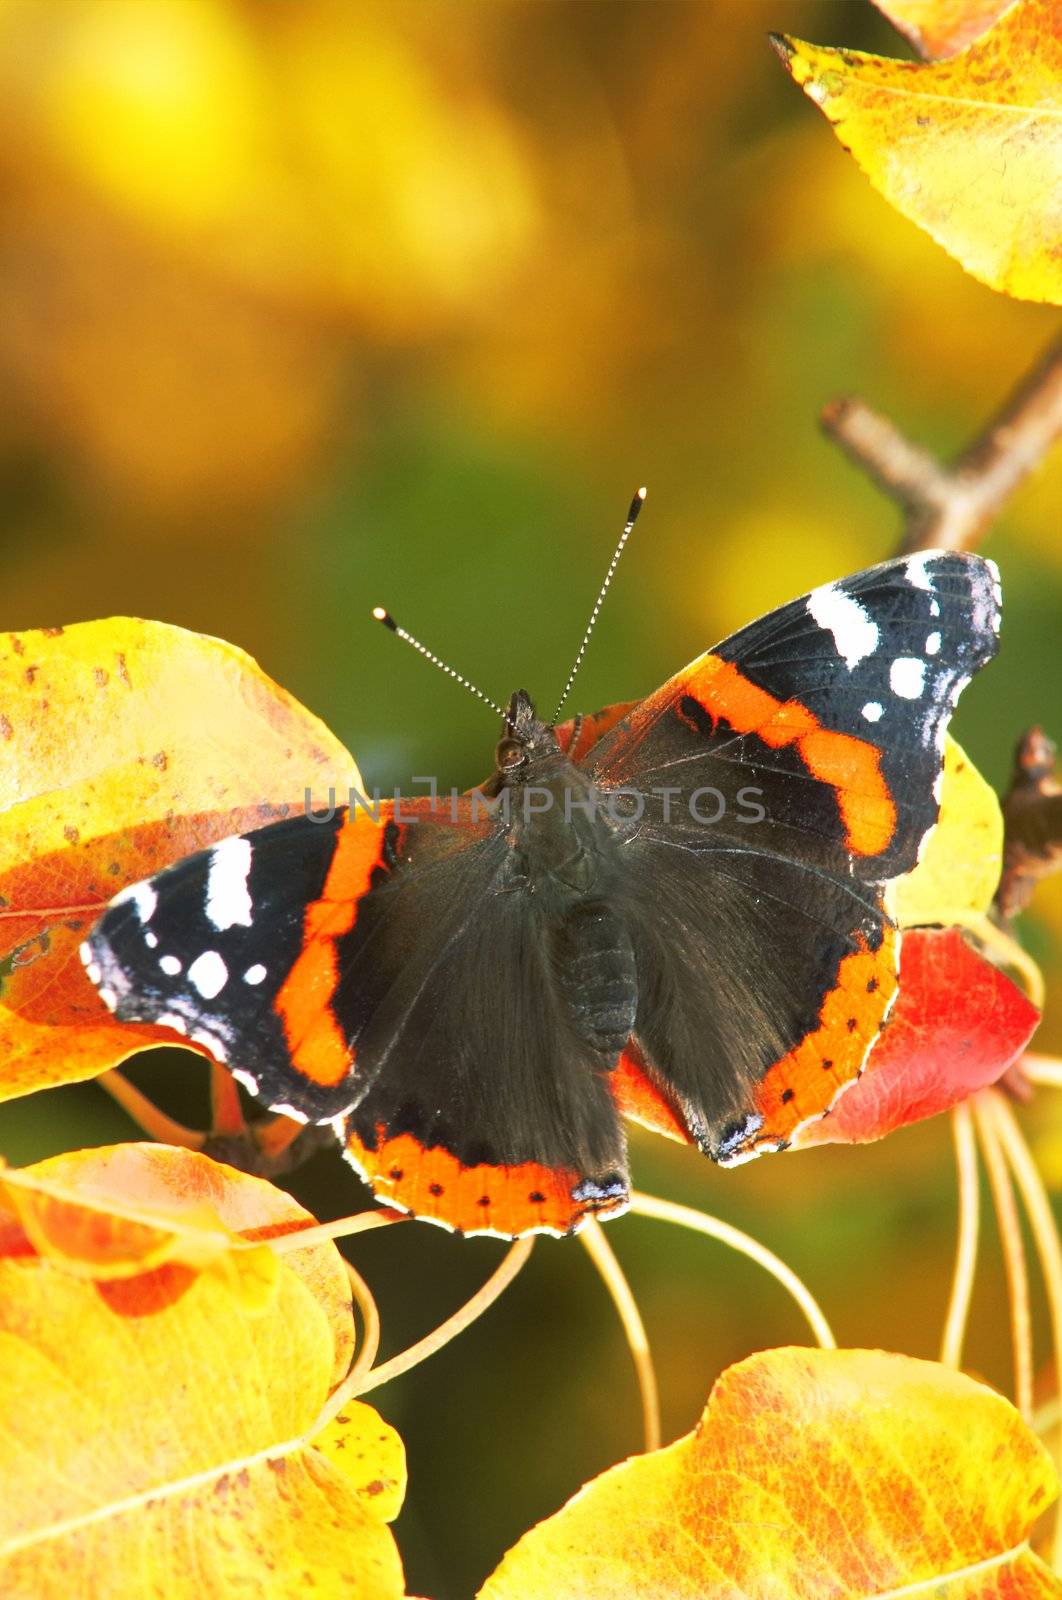 A fragile butterfly sitting amongst leaves